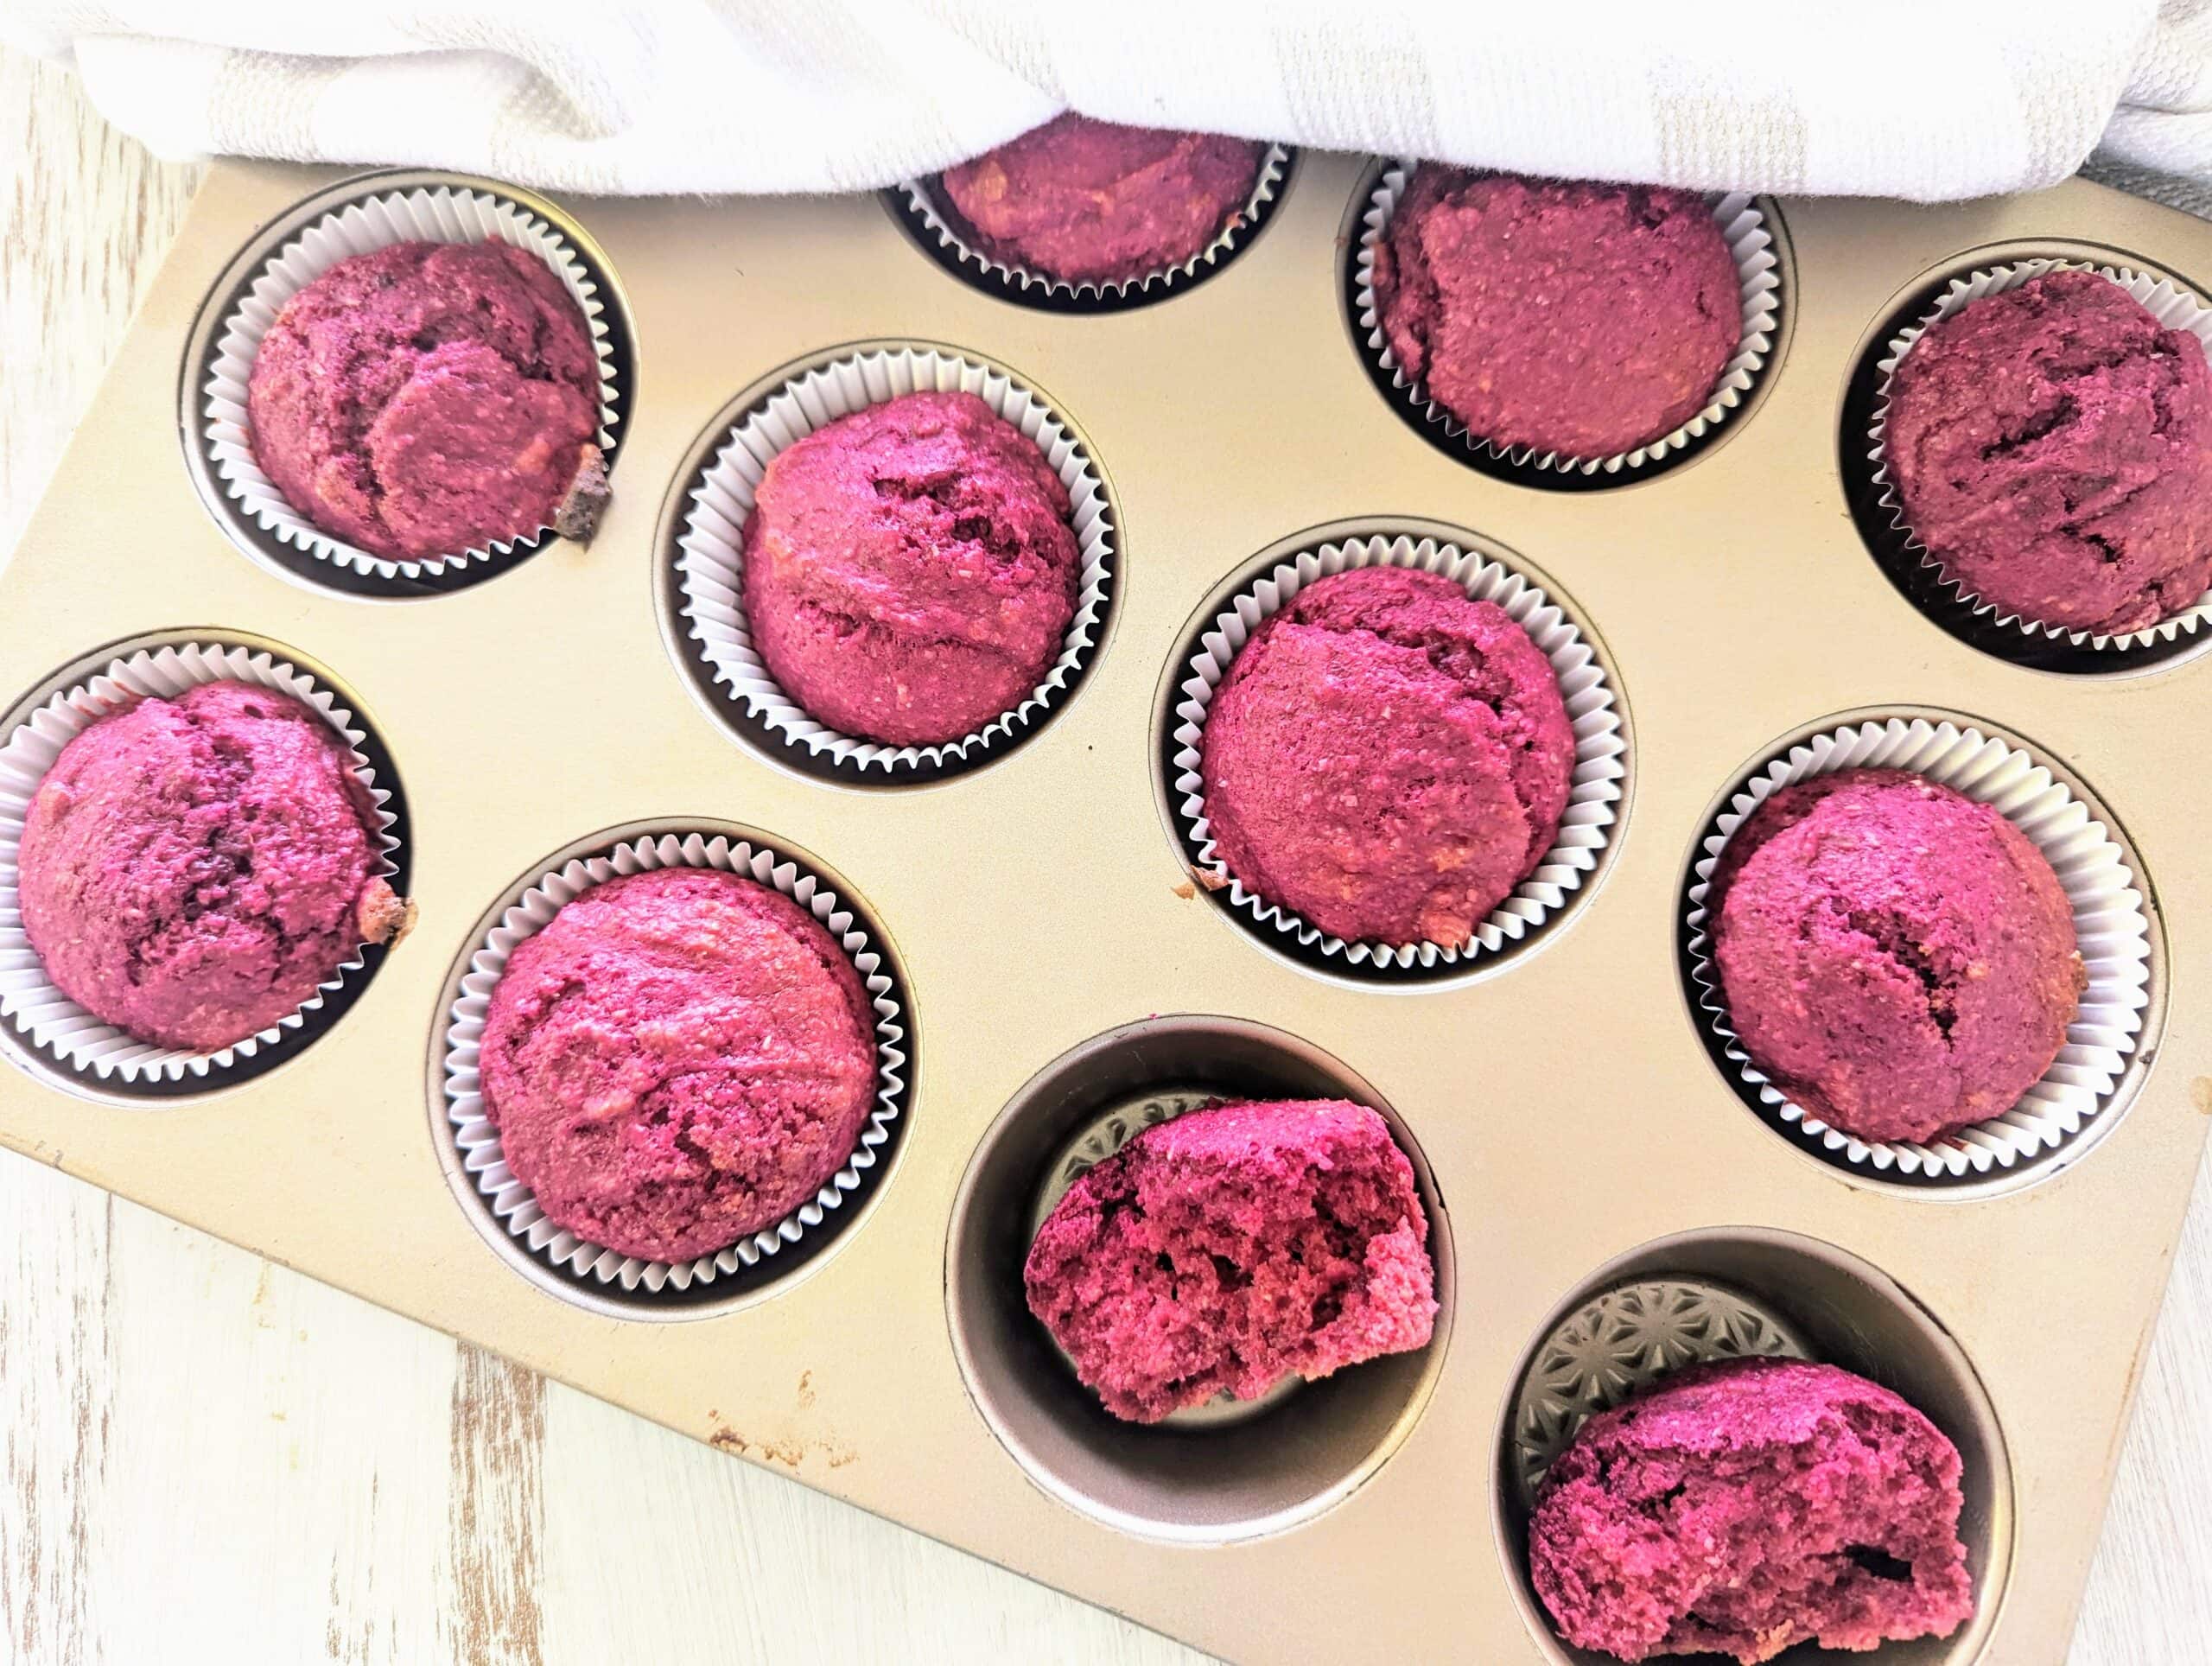 Vegan Beetroot Muffins in Muffin Tray